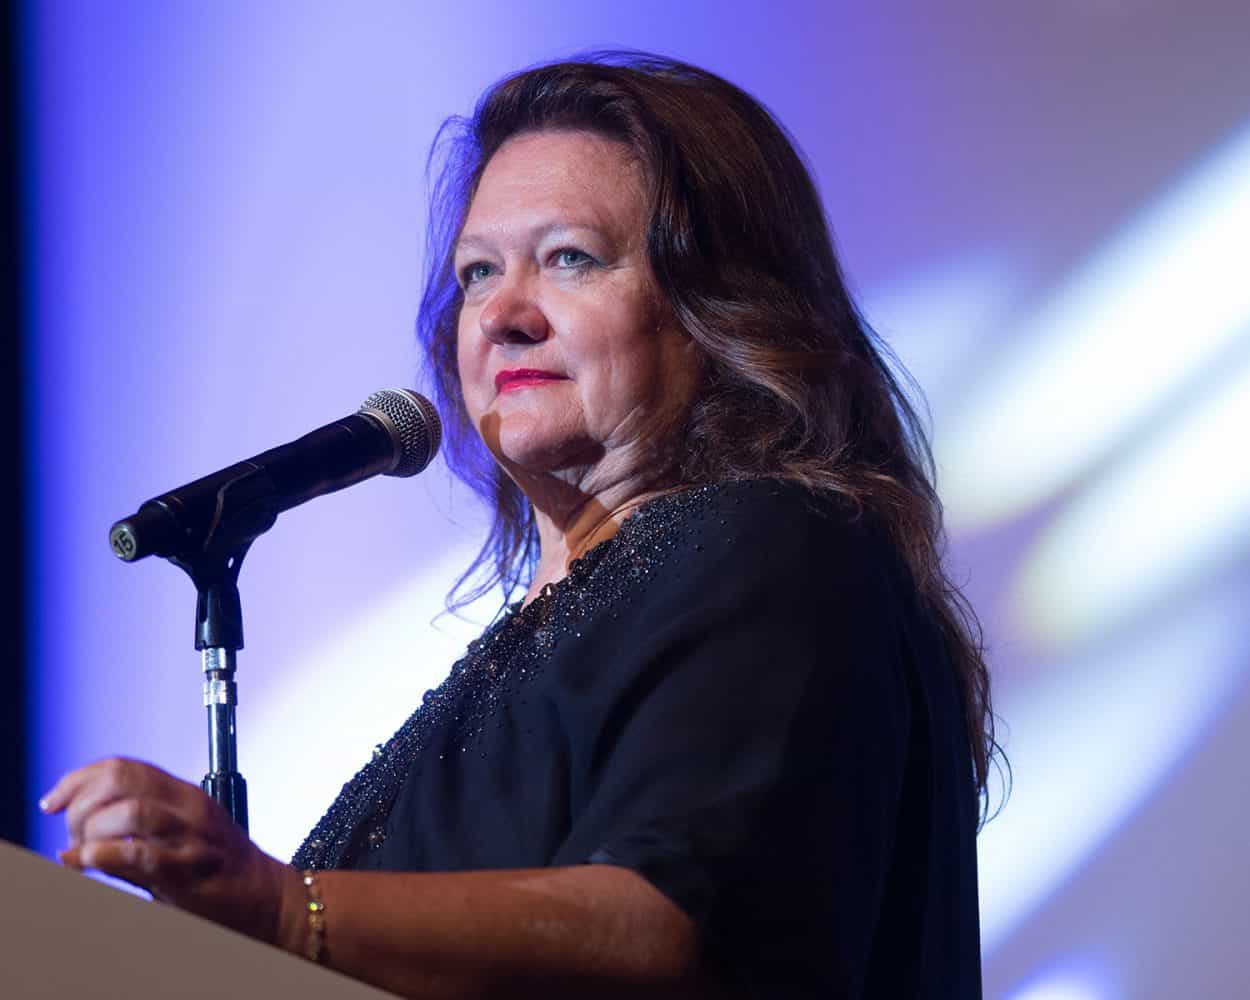 The 4 Tips for Success from Mining Magnate Gina Rinehart